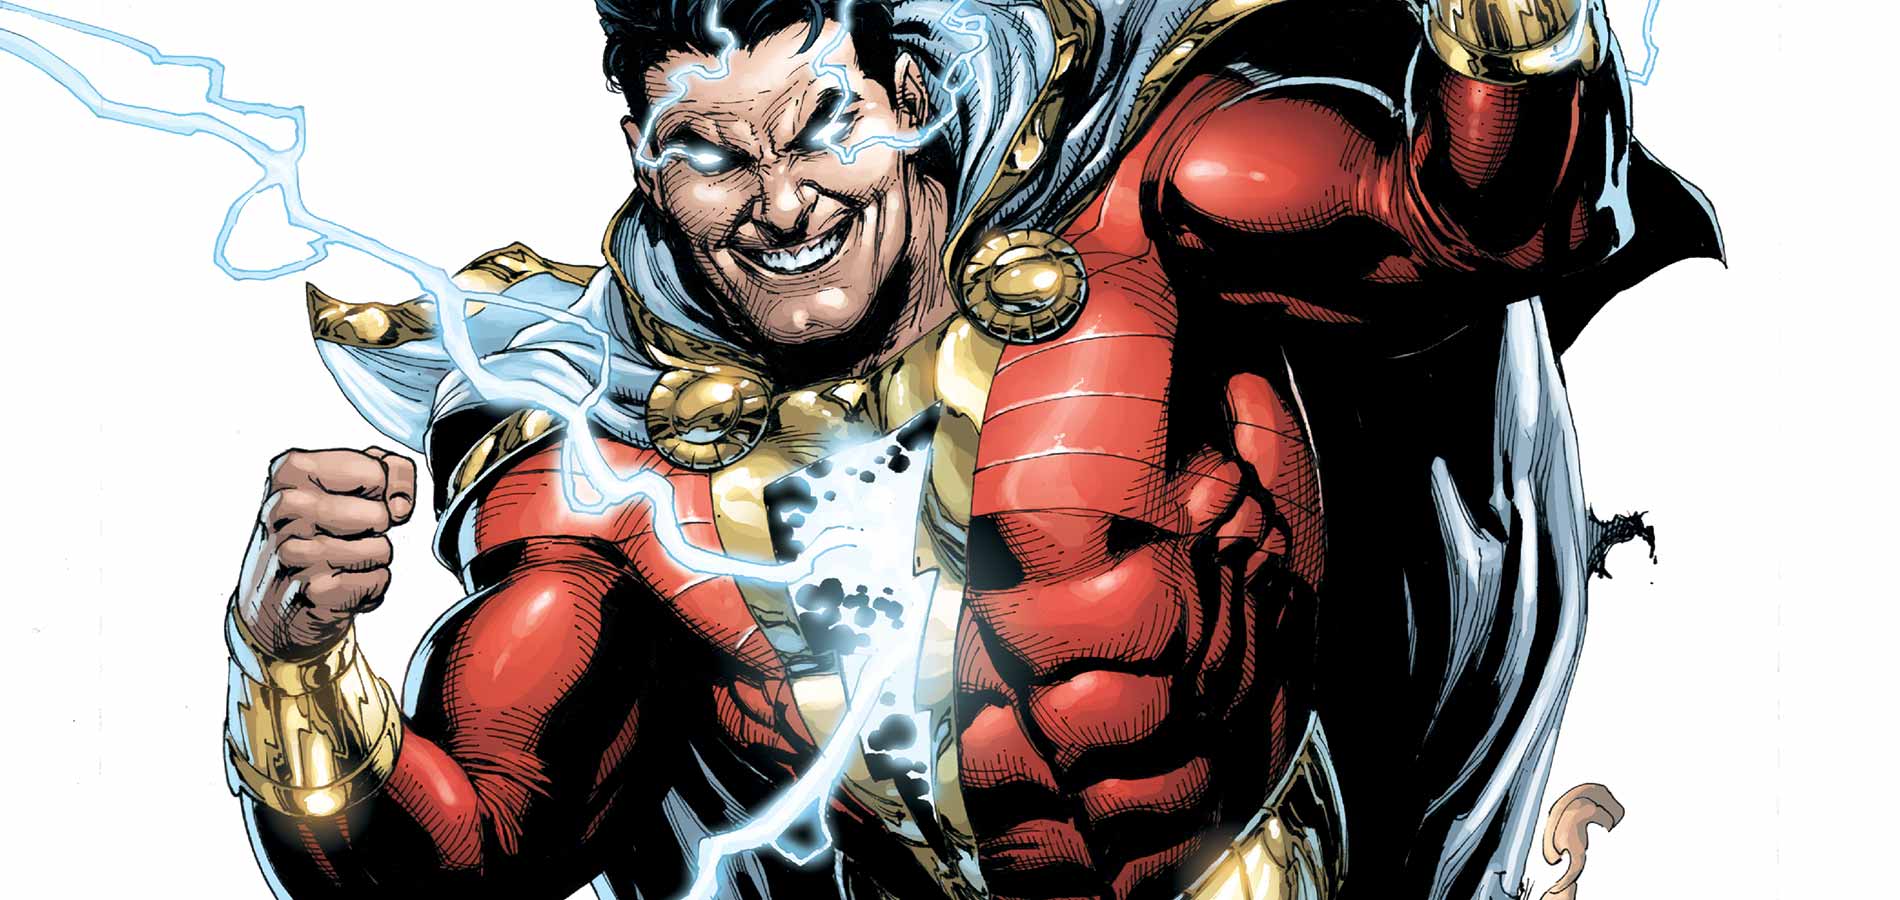 ‘Shazam!’ Is The Next DC Project to Shoot